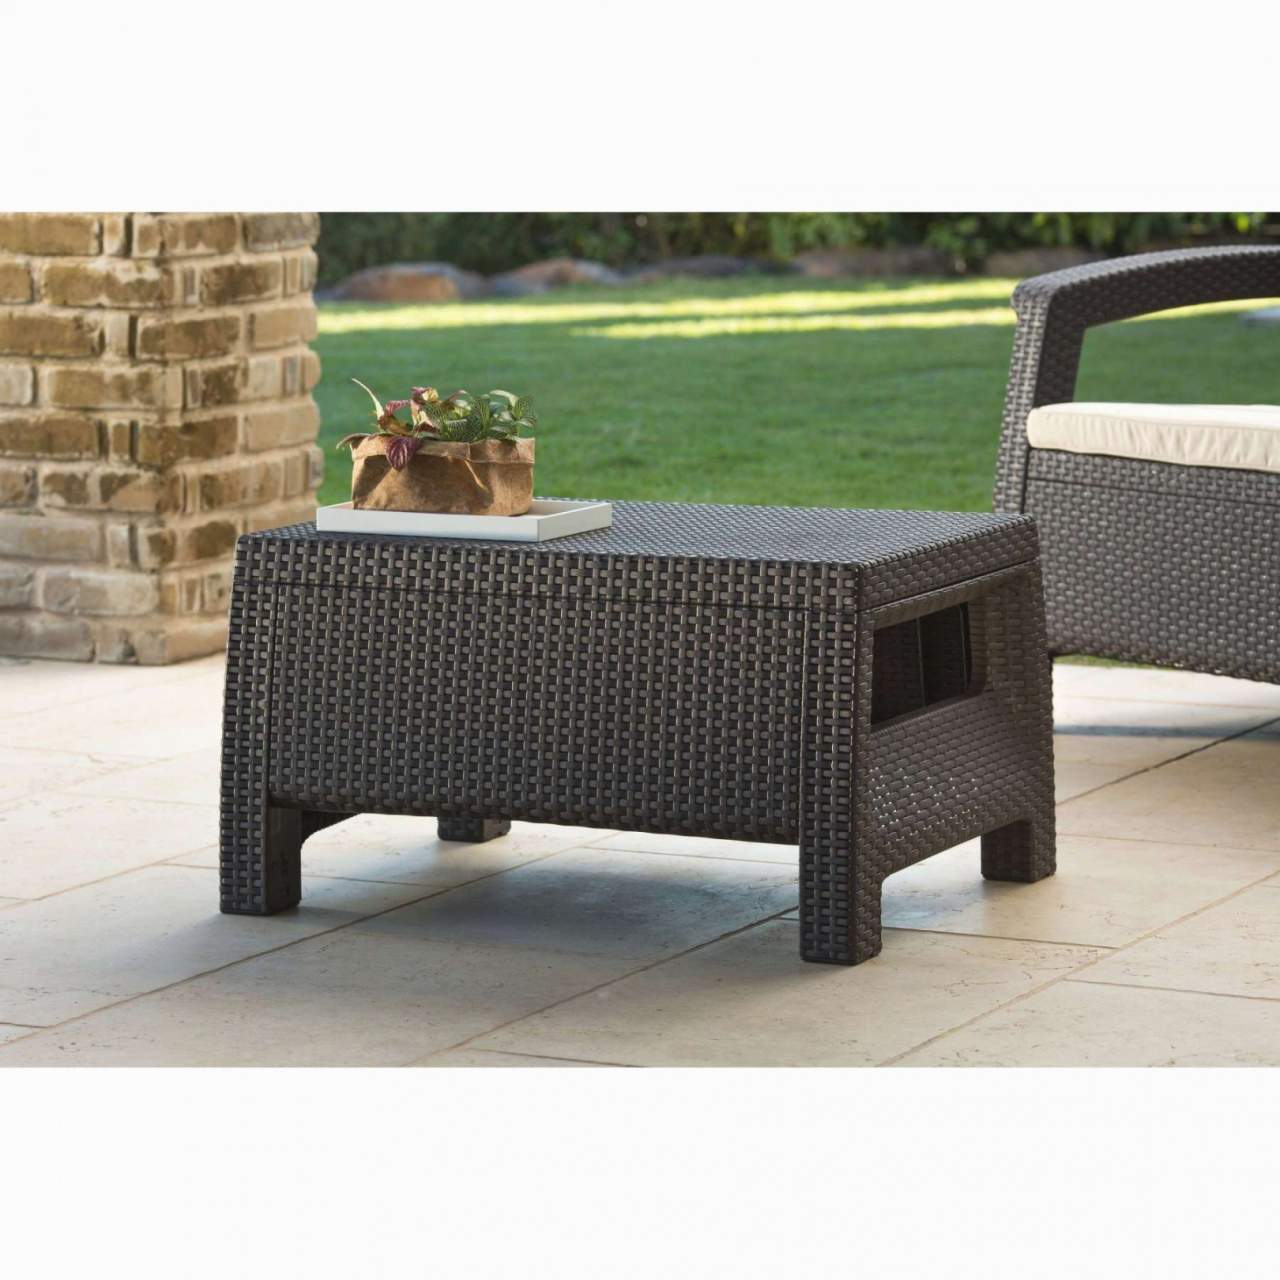 outdoor daybed rattan porch furniture basic wicker outdoor sofa 0d patio chairs durch outdoor daybed